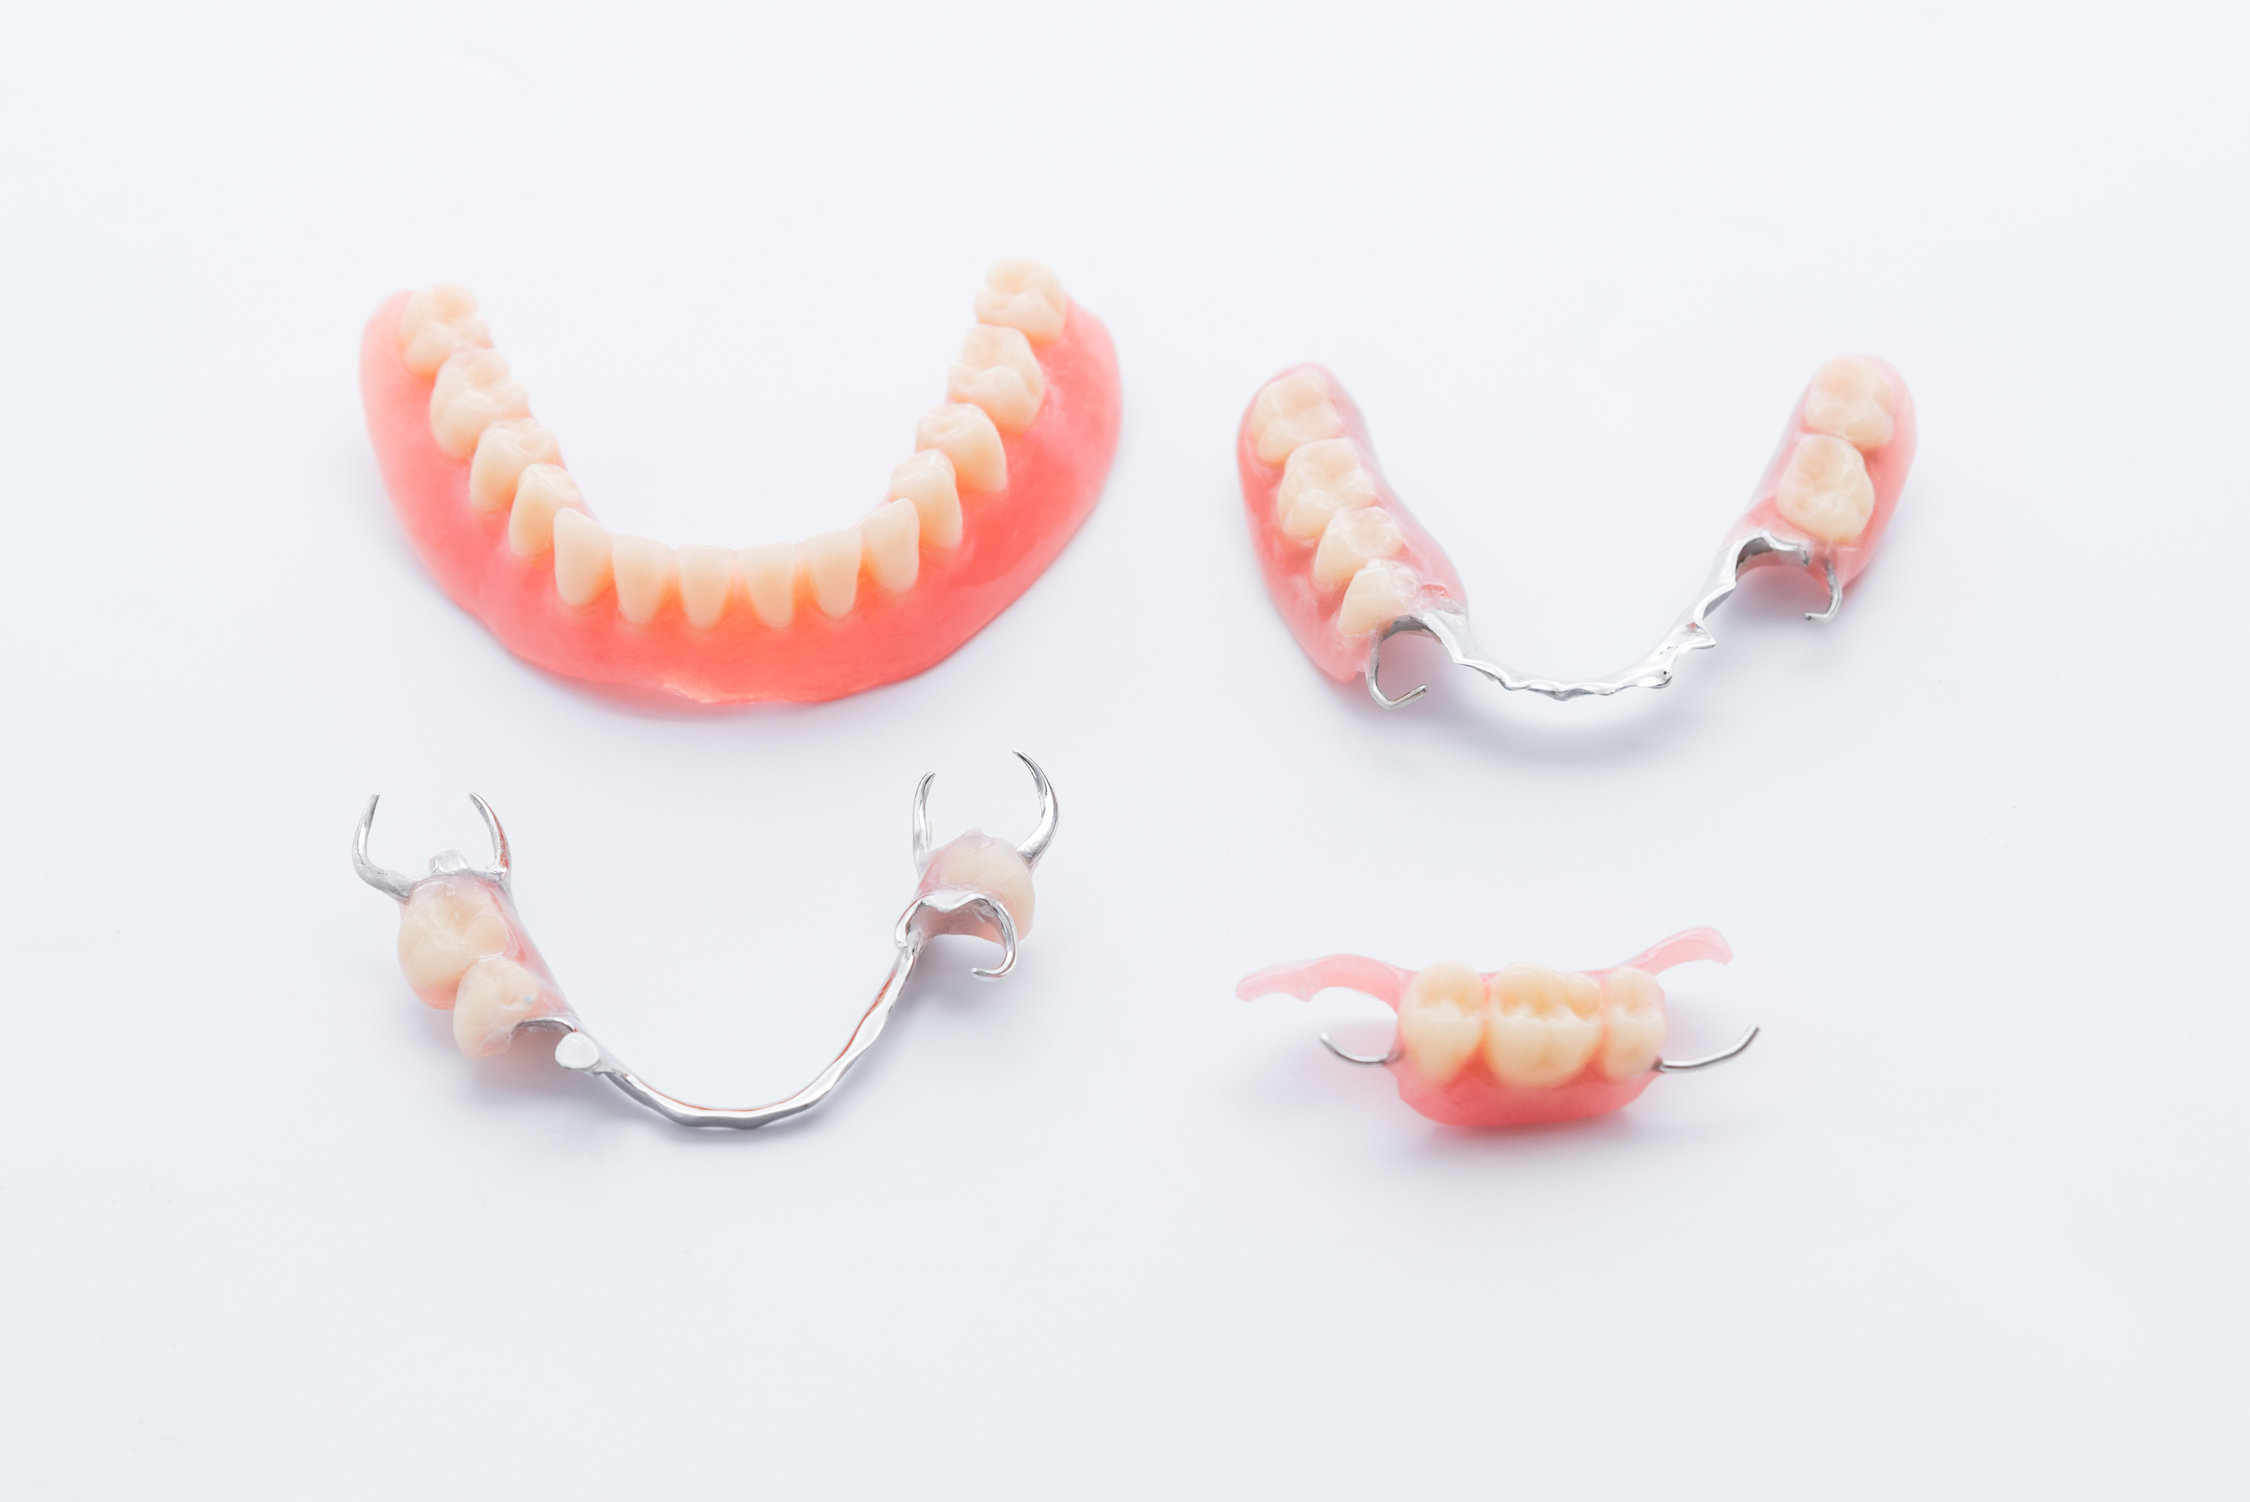 how long does it take to get false teeth